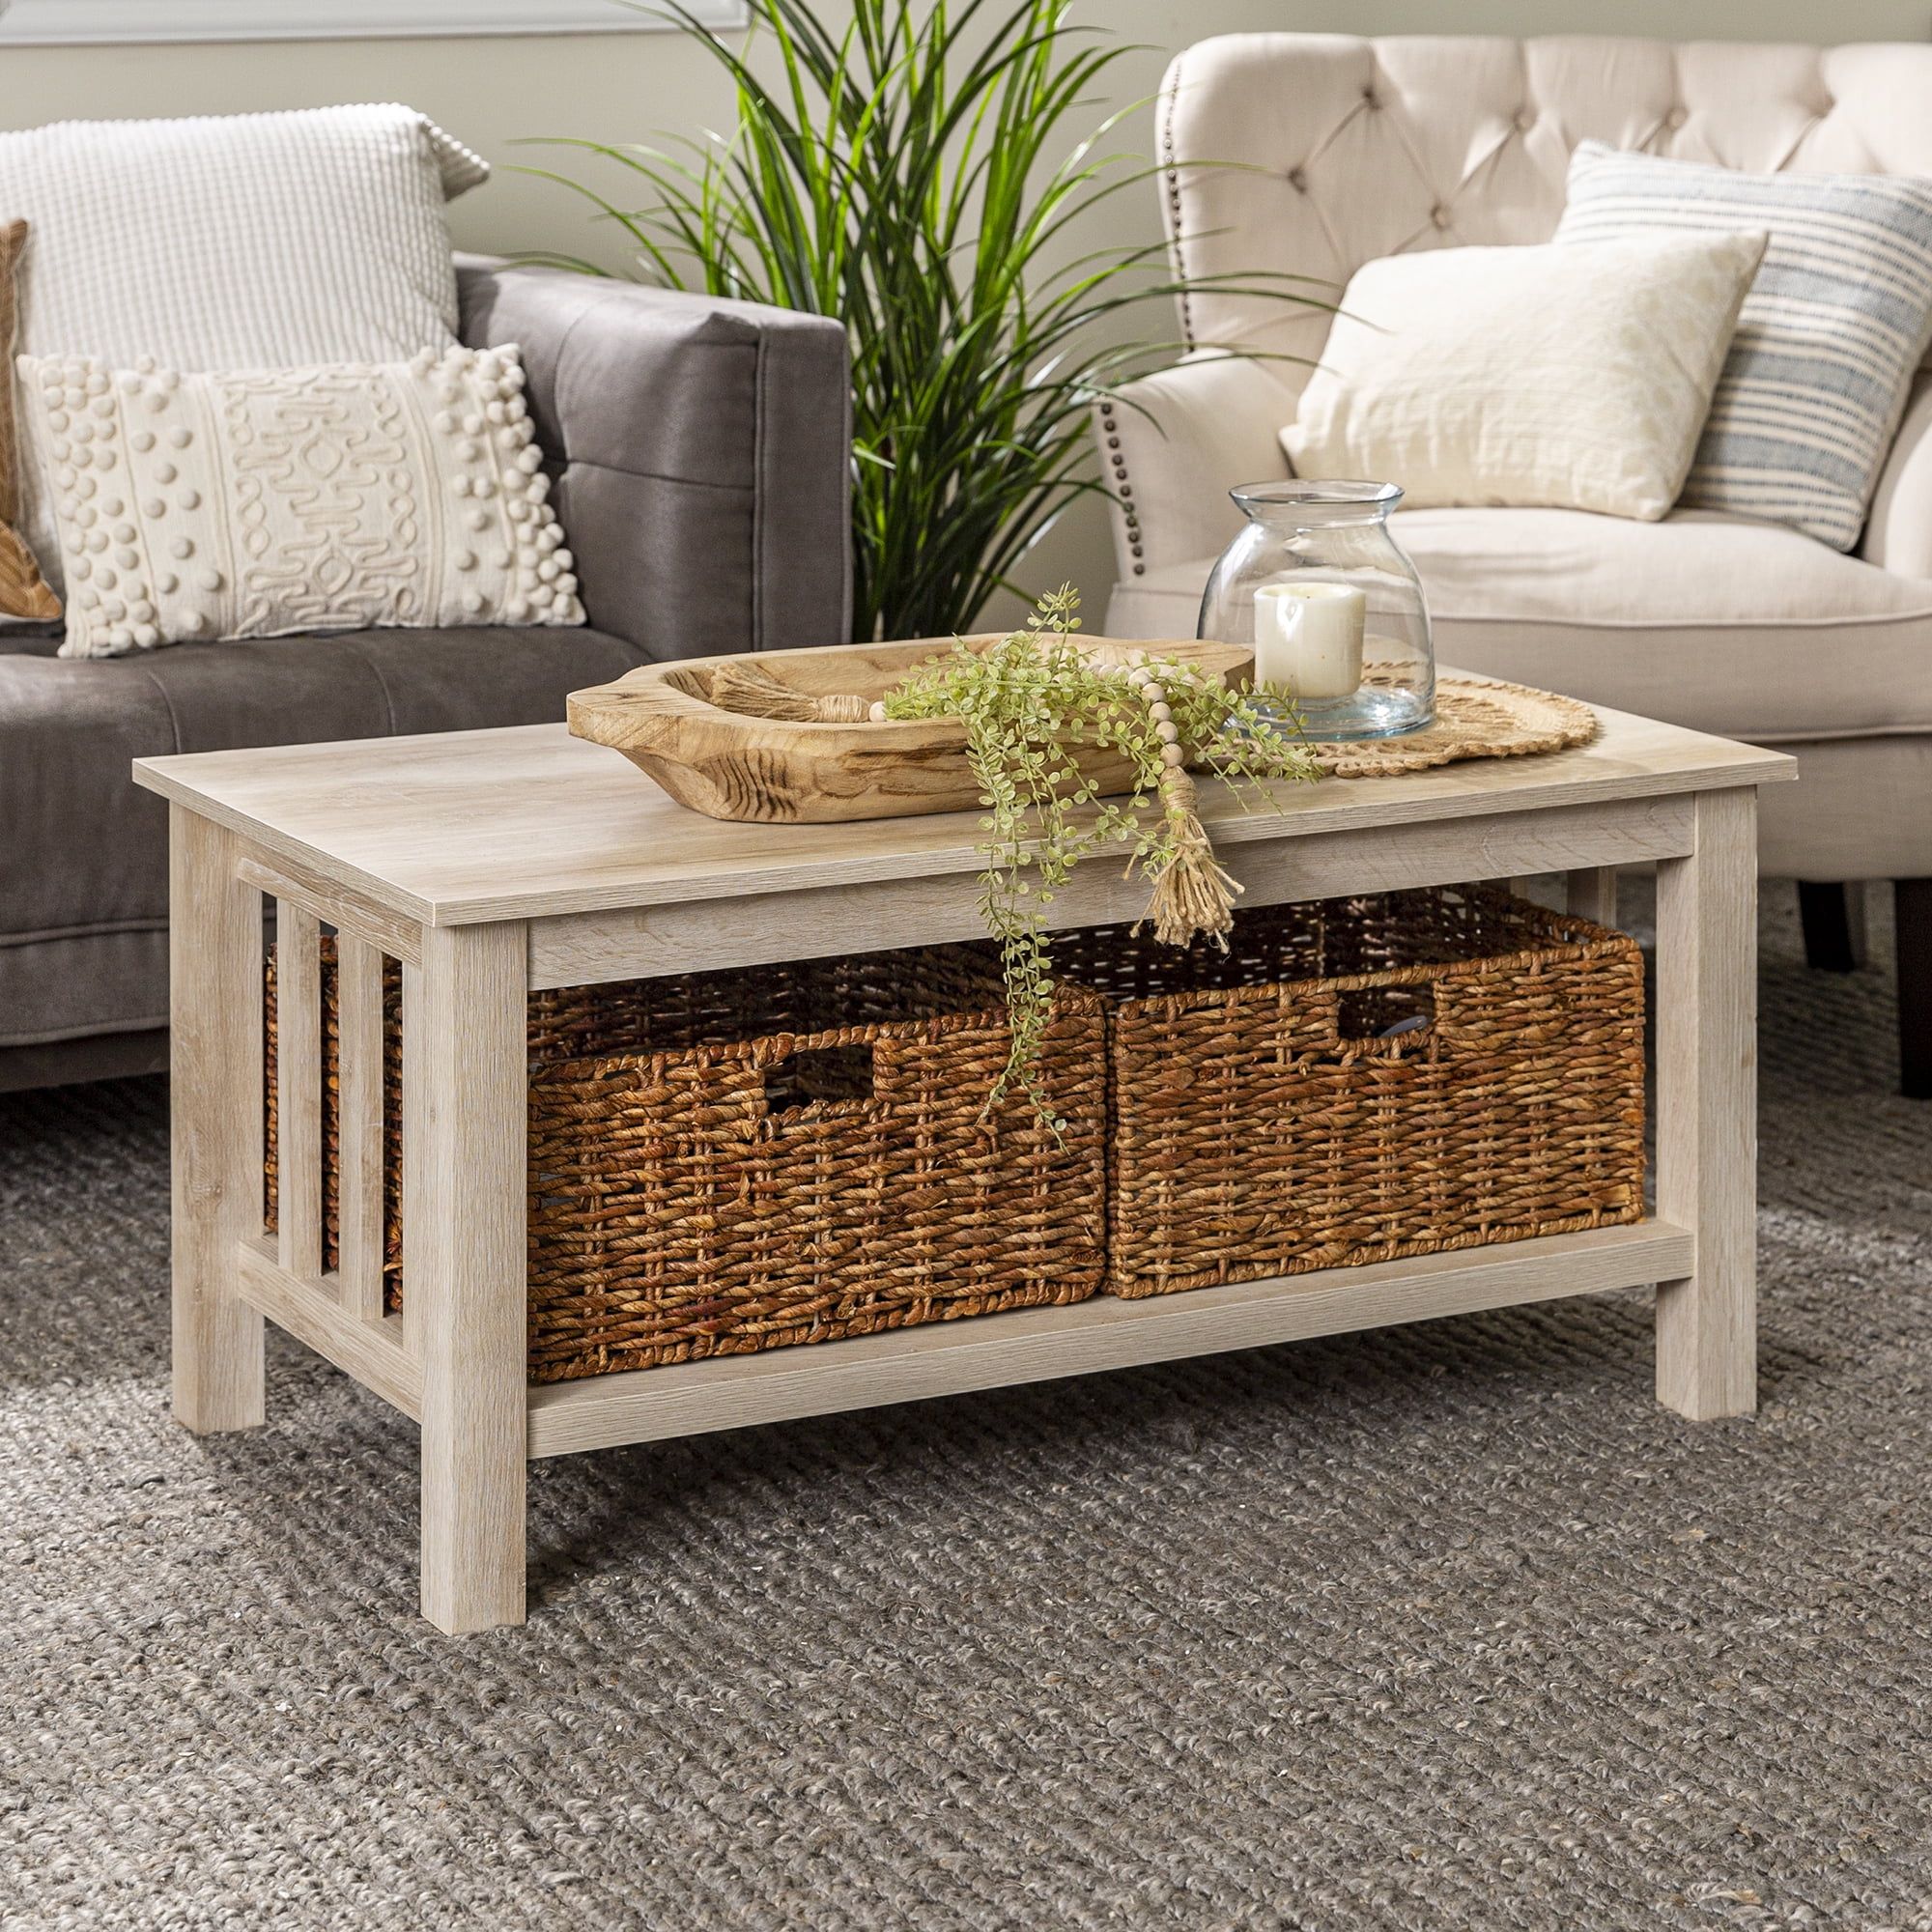 Woven Paths Traditional Storage Coffee Table With Bins, White Oak Pertaining To Coffee Tables With Open Storage Shelves (View 11 of 20)